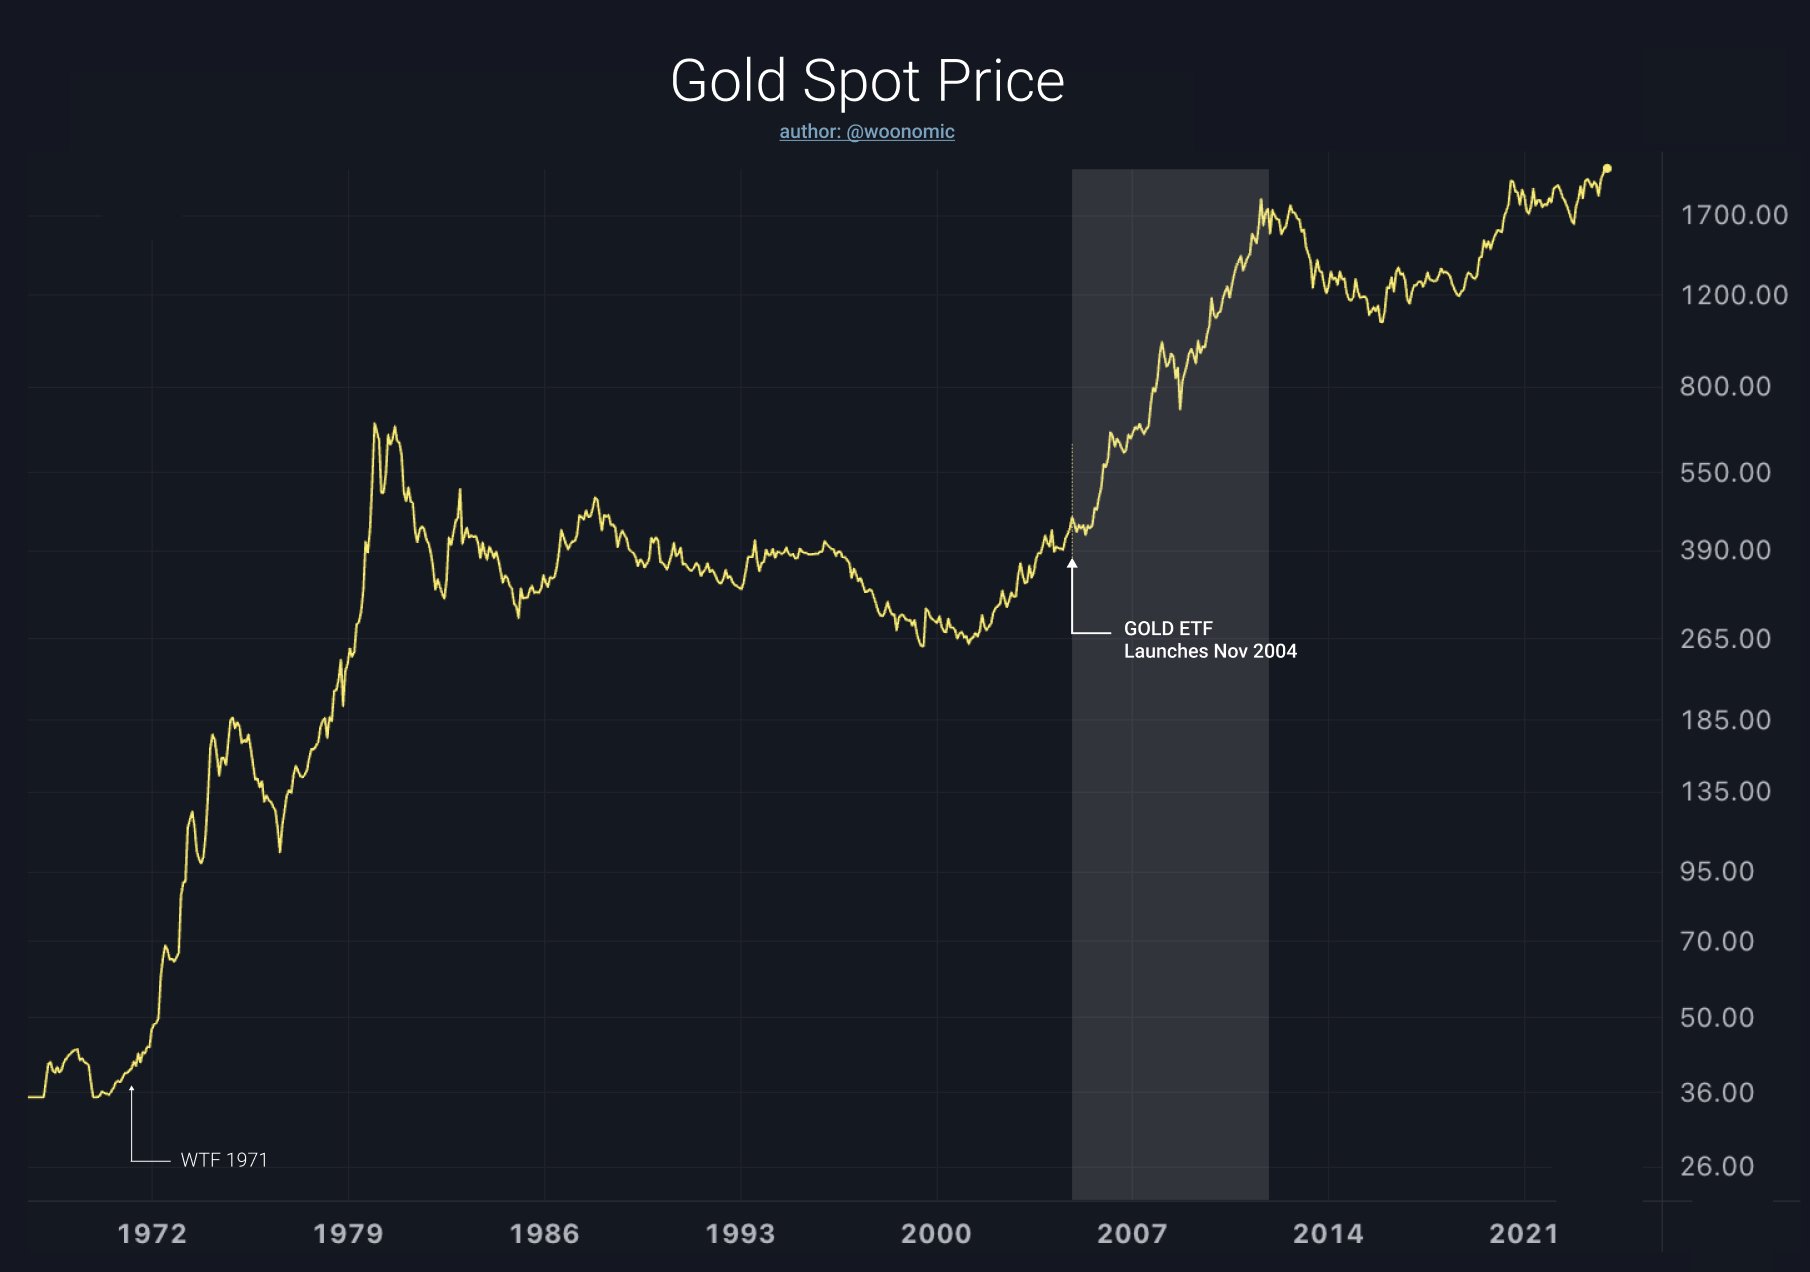 gold spot price rally after first ETF